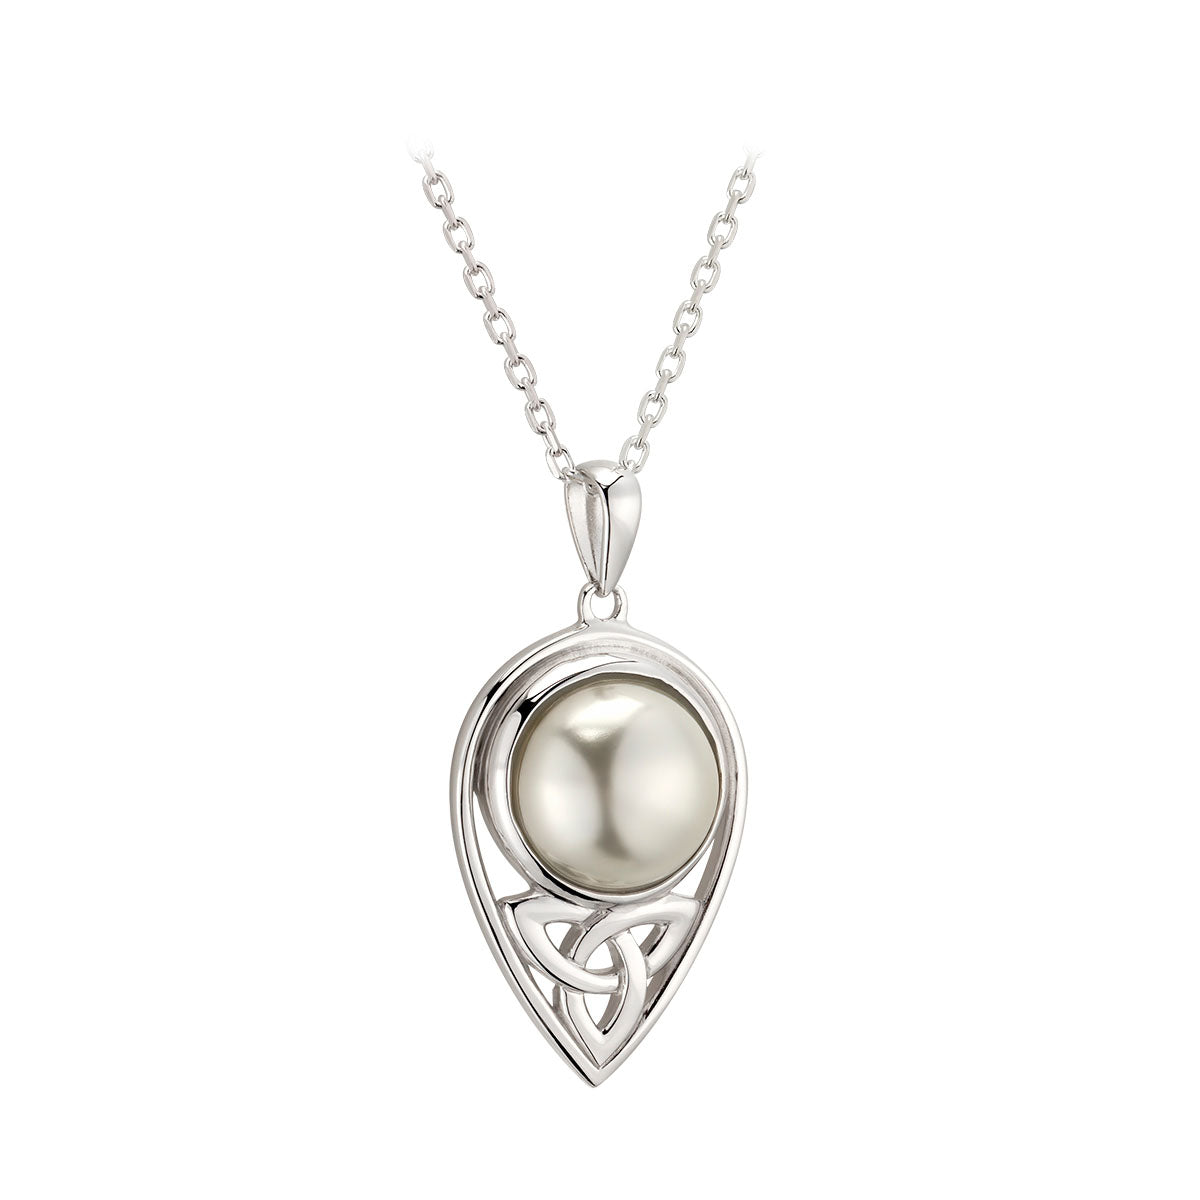 contemporary irish sterling silver trinity knot glass pearl pendant S46833 on 18 inch silver rolo chain from Solvar